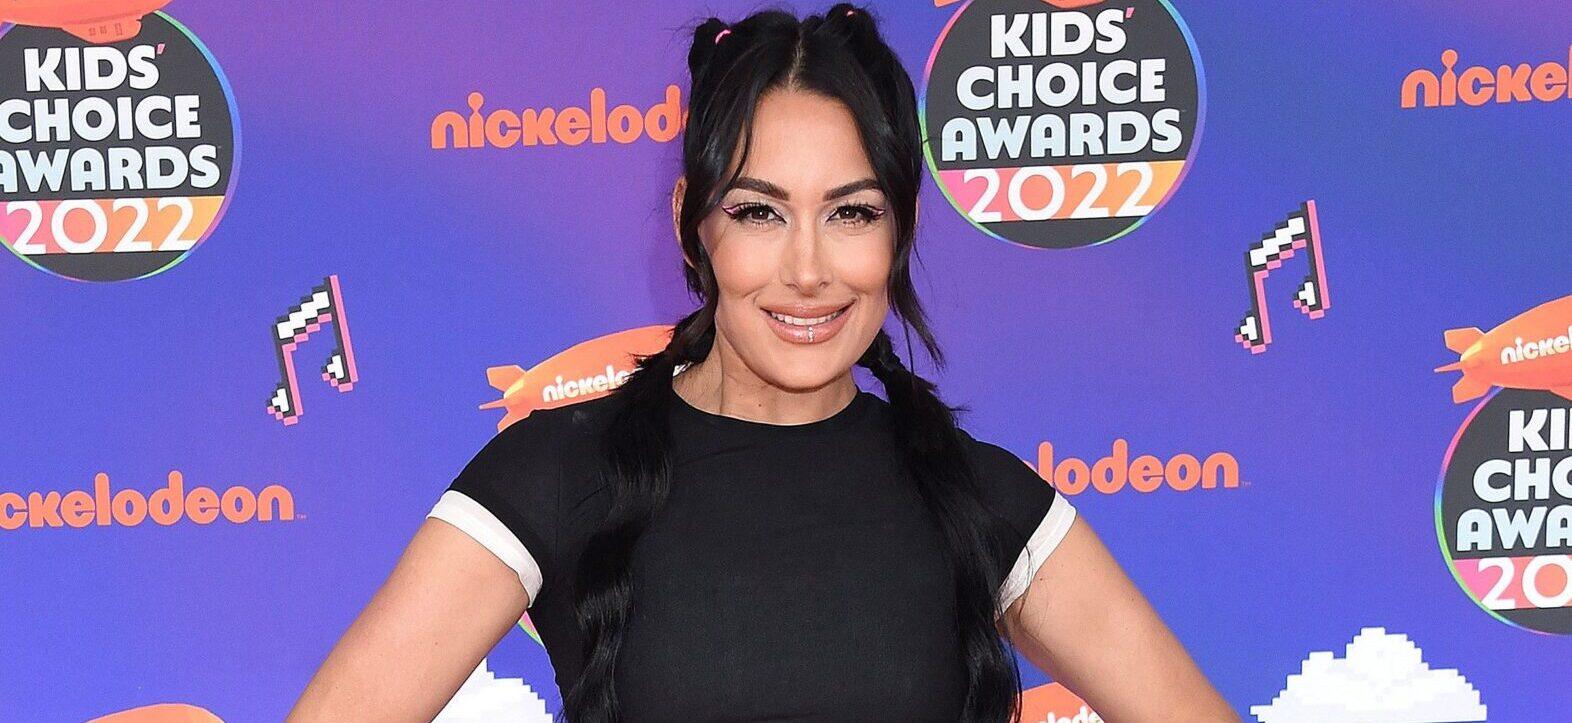 Brie Bella Compares Raising Toddler Son To Wrestling, Says It’s Tougher